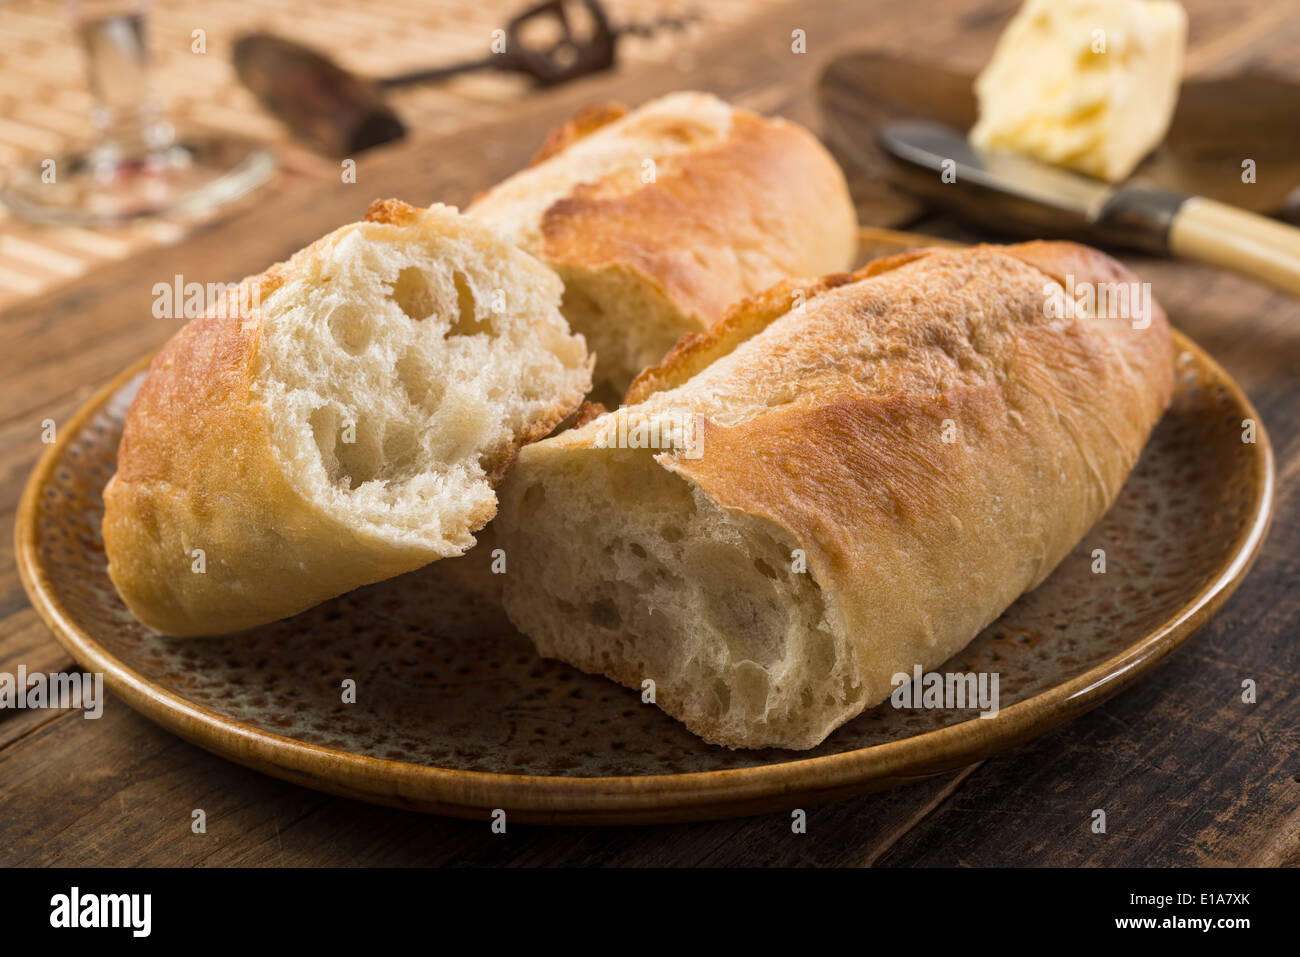 French bread baguette and butter on a rustic wooden tabletop. Stock Photo